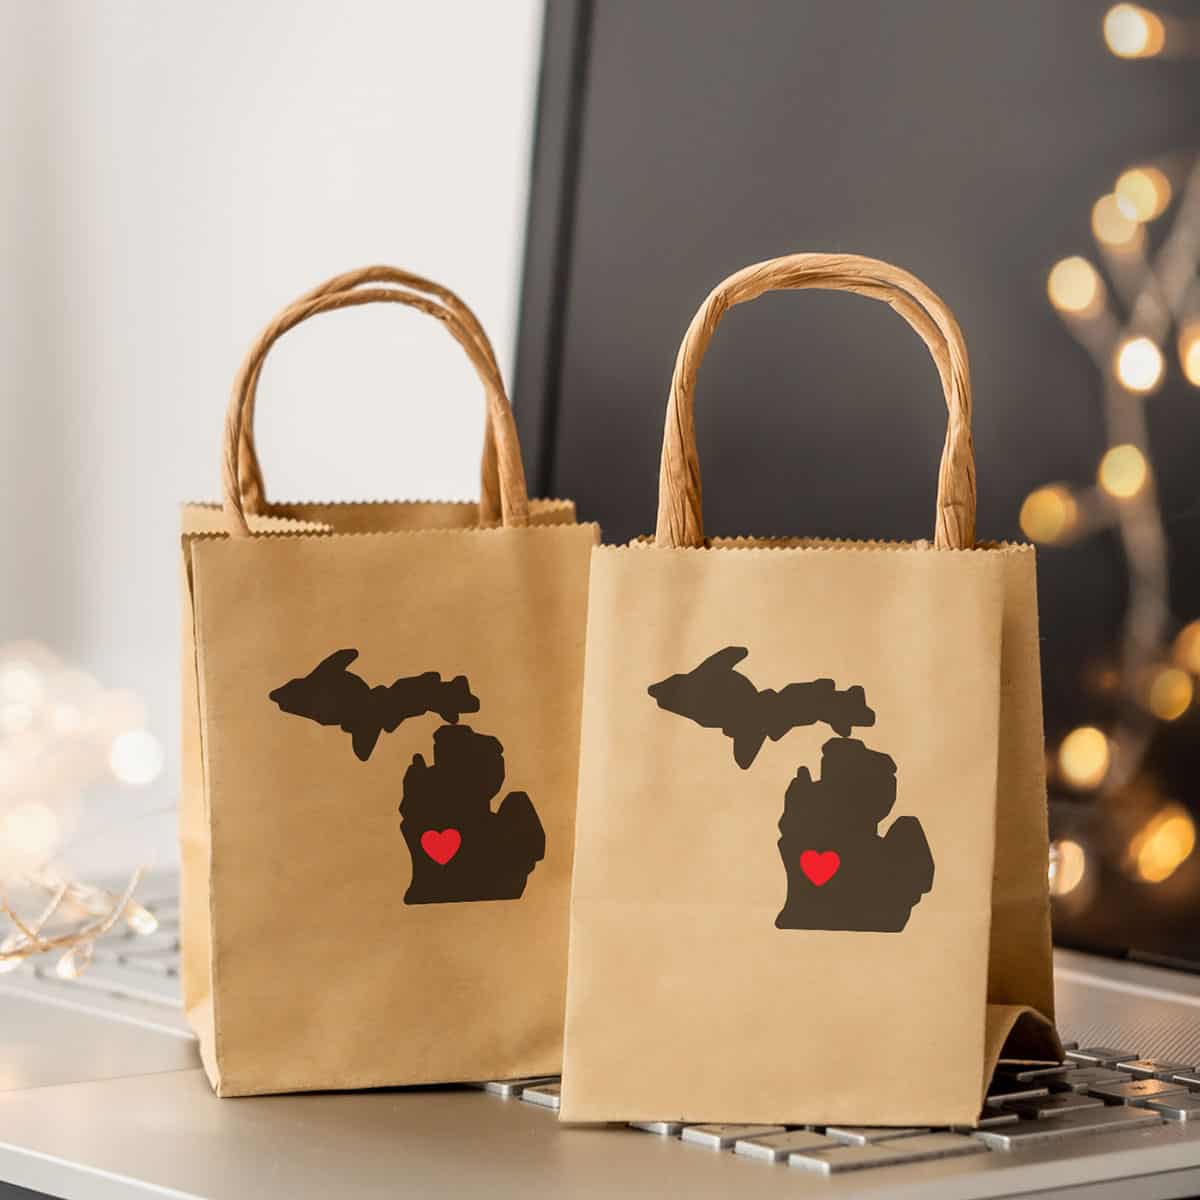 Shopping bags with the state of Michigan on them.